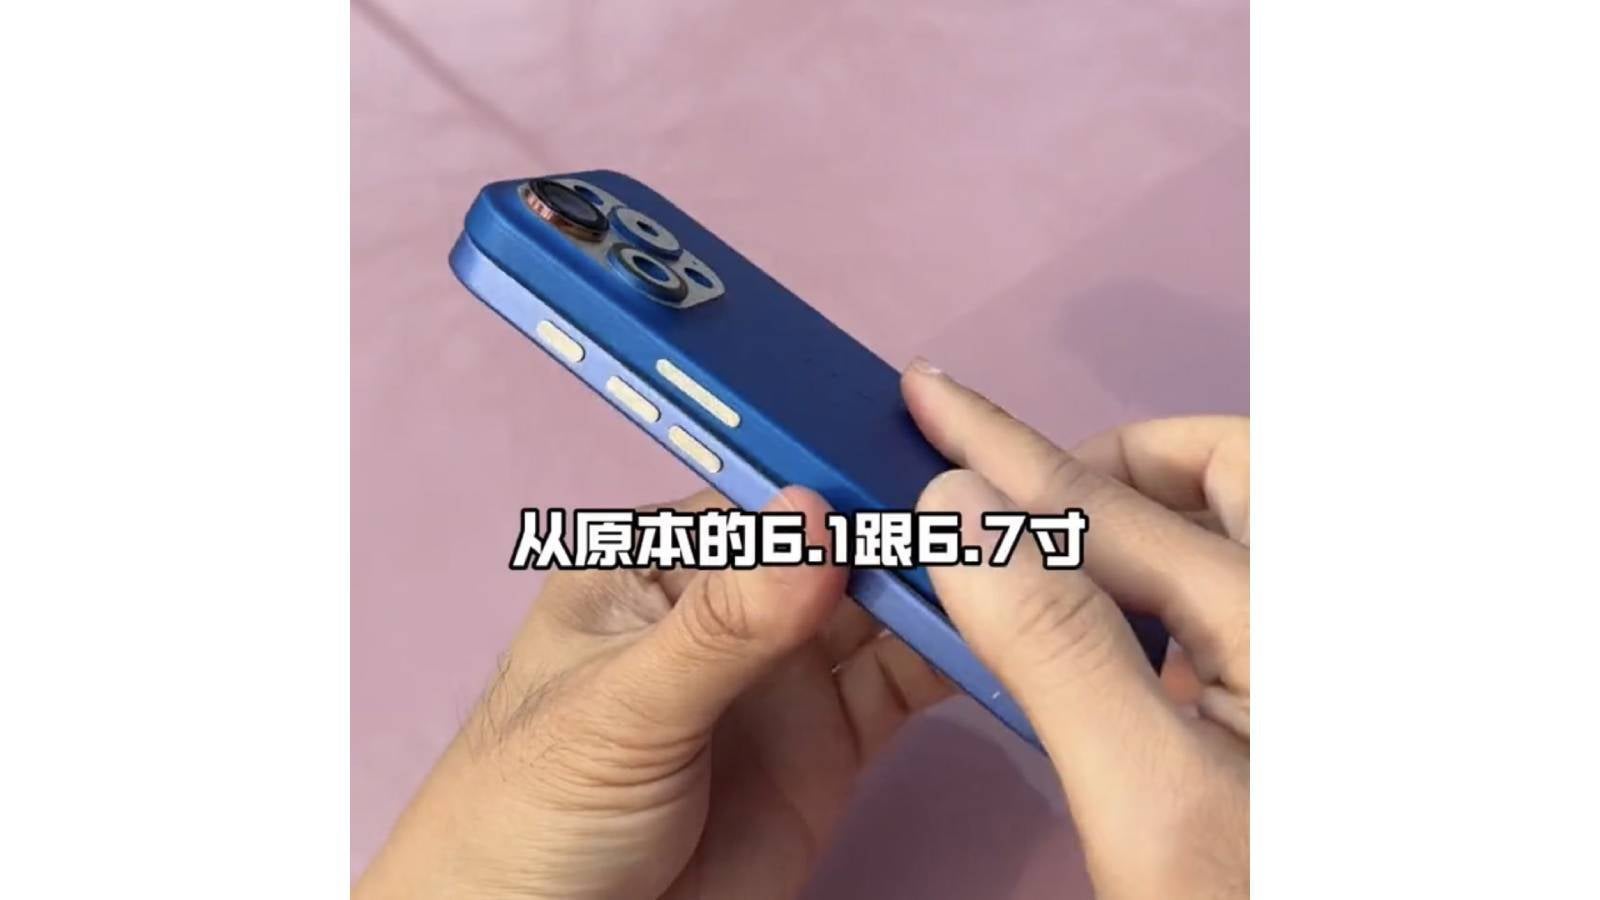 The iPhone 16 Pro&#039;s customizable Action button might be a little bigger - Few iPhone 16 surprises left as images of dummy units, case, and new color variants leaked